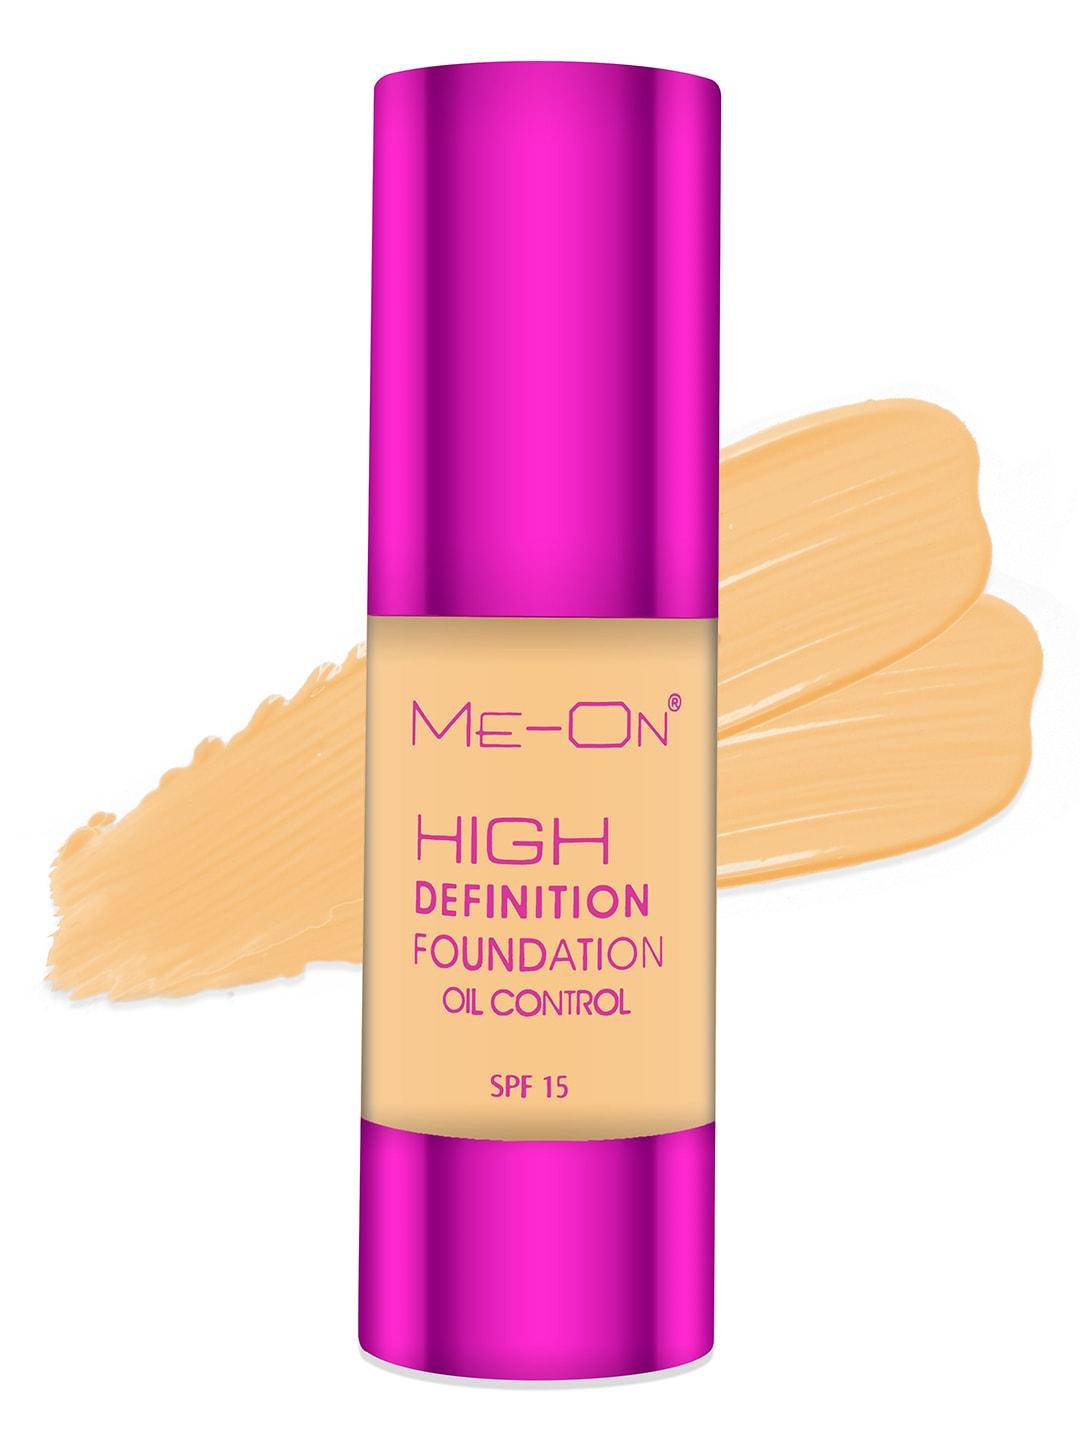 me-on high-definition oil-control spf15 foundation 35ml - shade 02